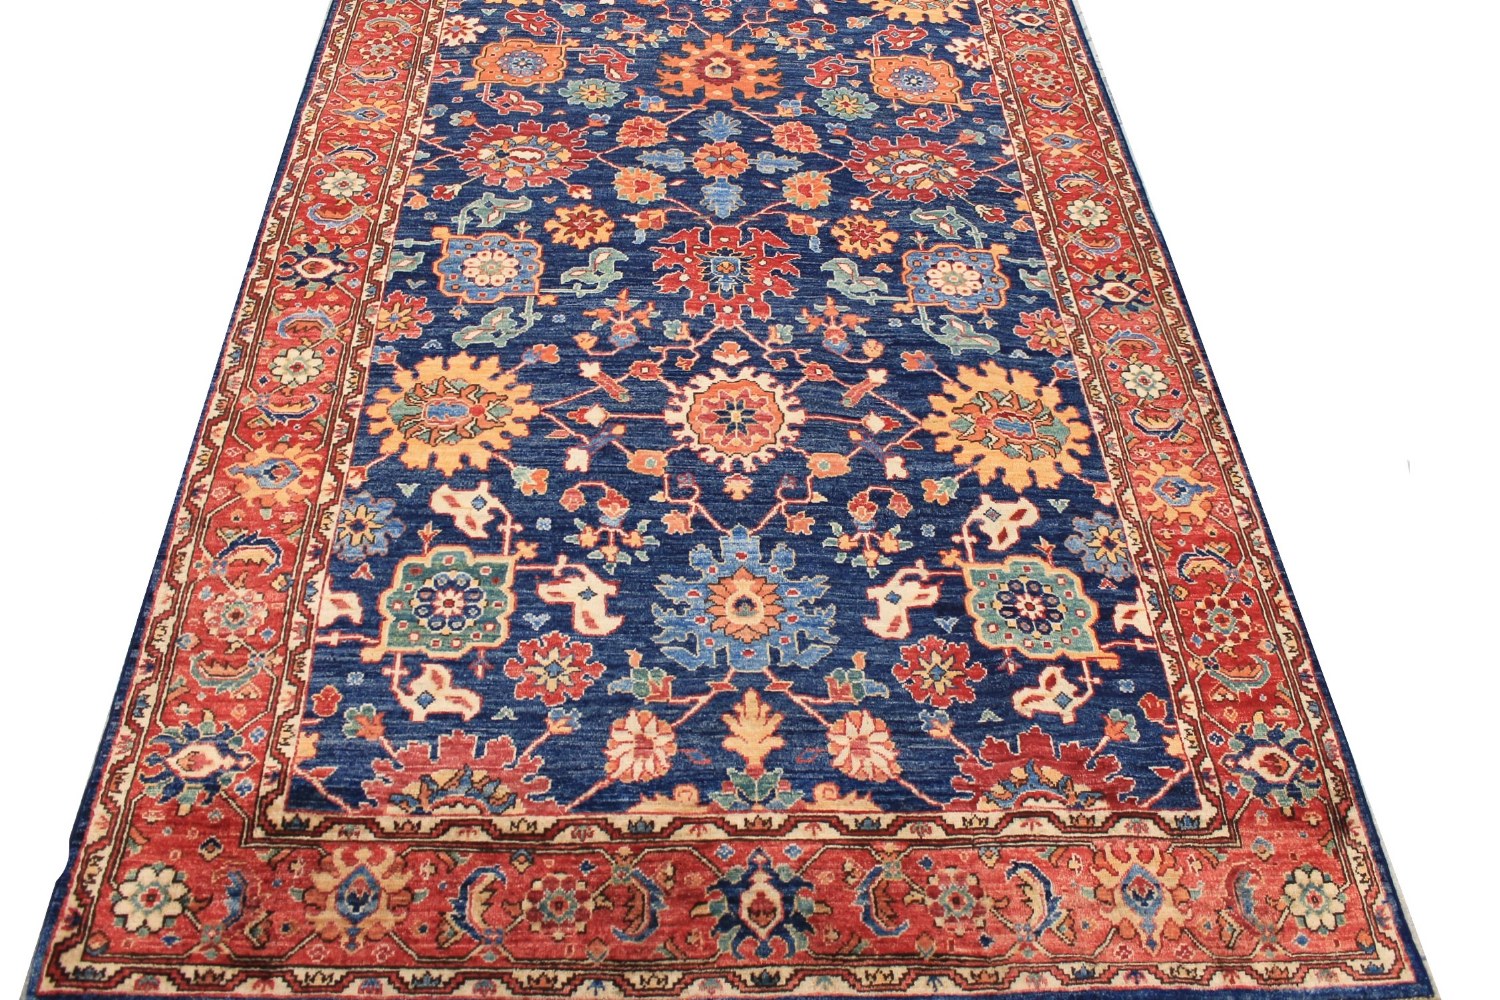 5x7/8 Aryana & Antique Revivals Hand Knotted Wool Area Rug - MR026074